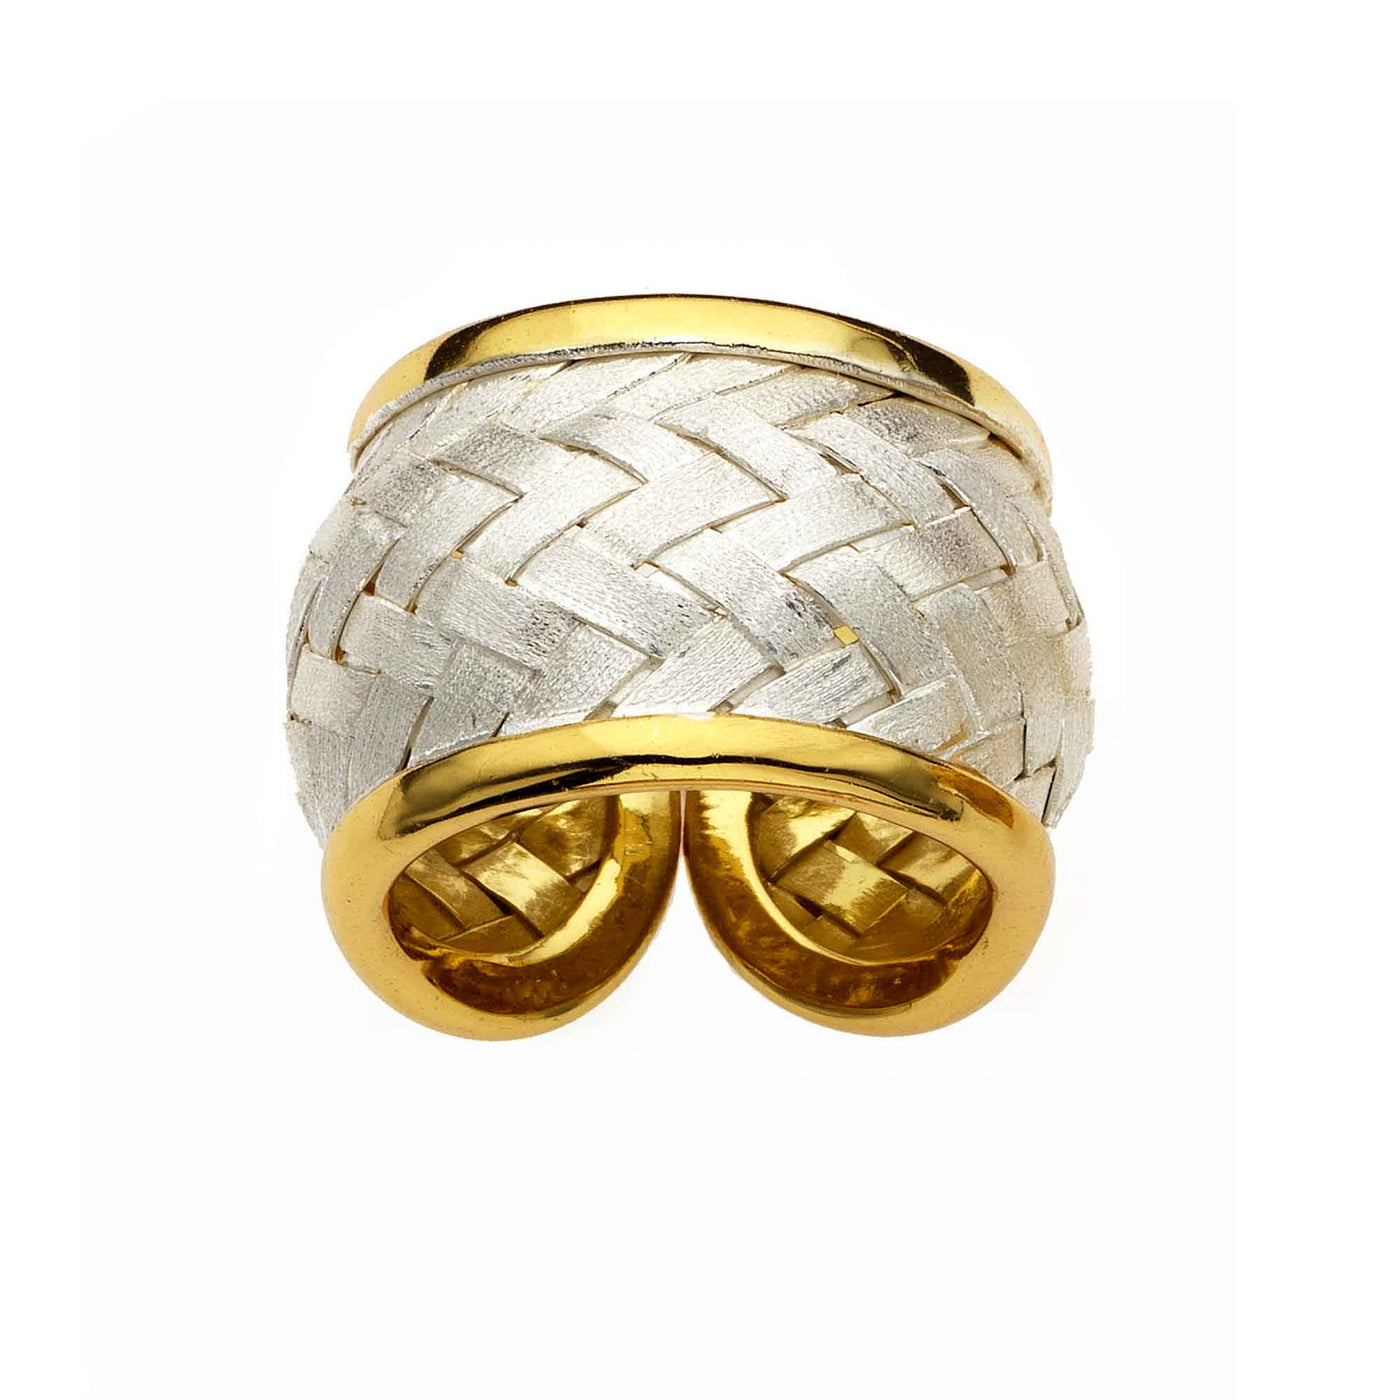 Rebecca Sloane Gold Plated Sterling Silver Woven Basketweave Ring